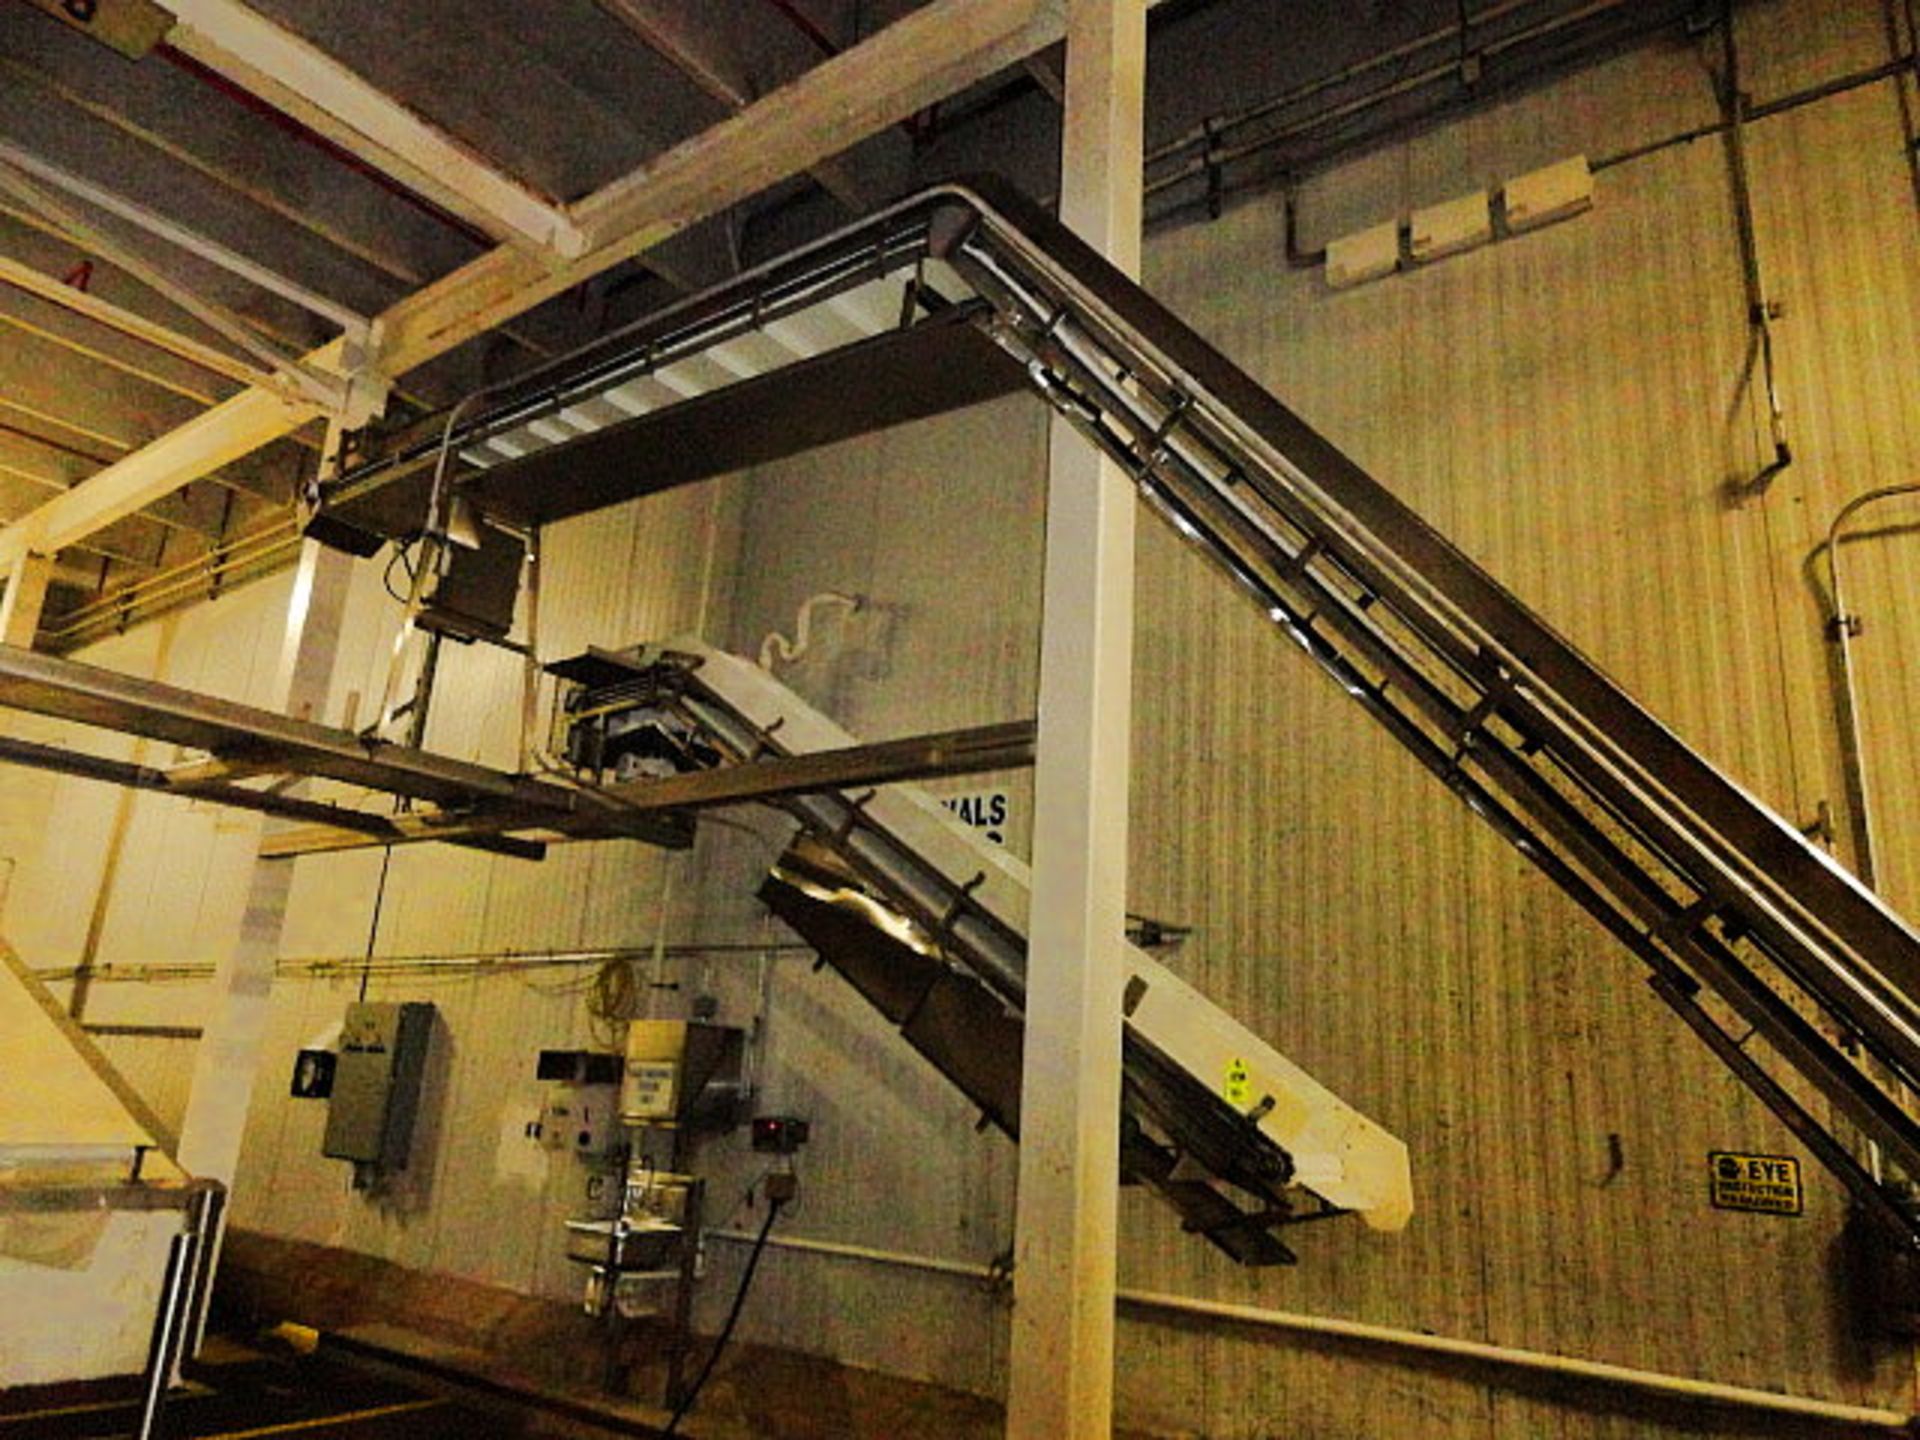 Incline Cleated Belt Conveyor, 12" x 30' cleated, still installed, 12" w x 2" cleats, 12" spacing, - Image 4 of 4